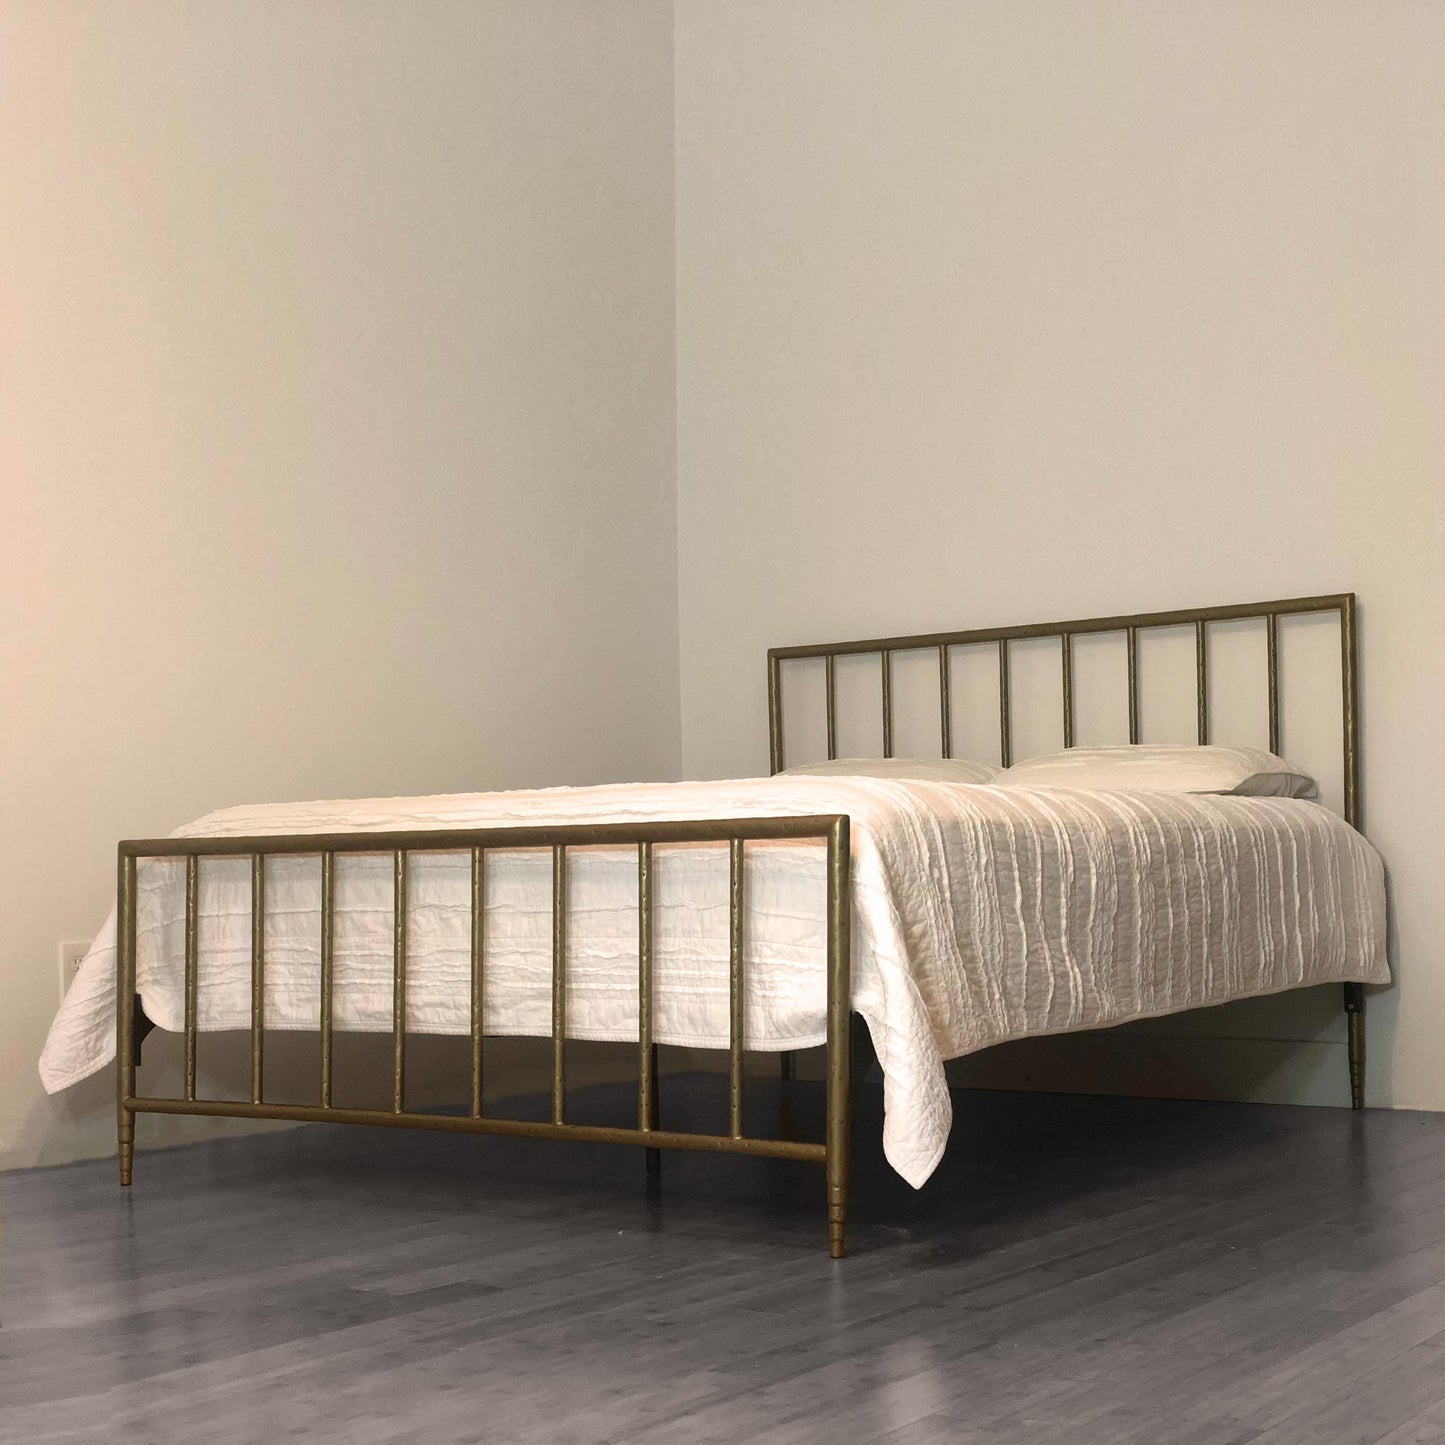 Archaeo Pitted Brass Hammered Iron Platform Bed by Heiressy High-end Modern Iron Beds.